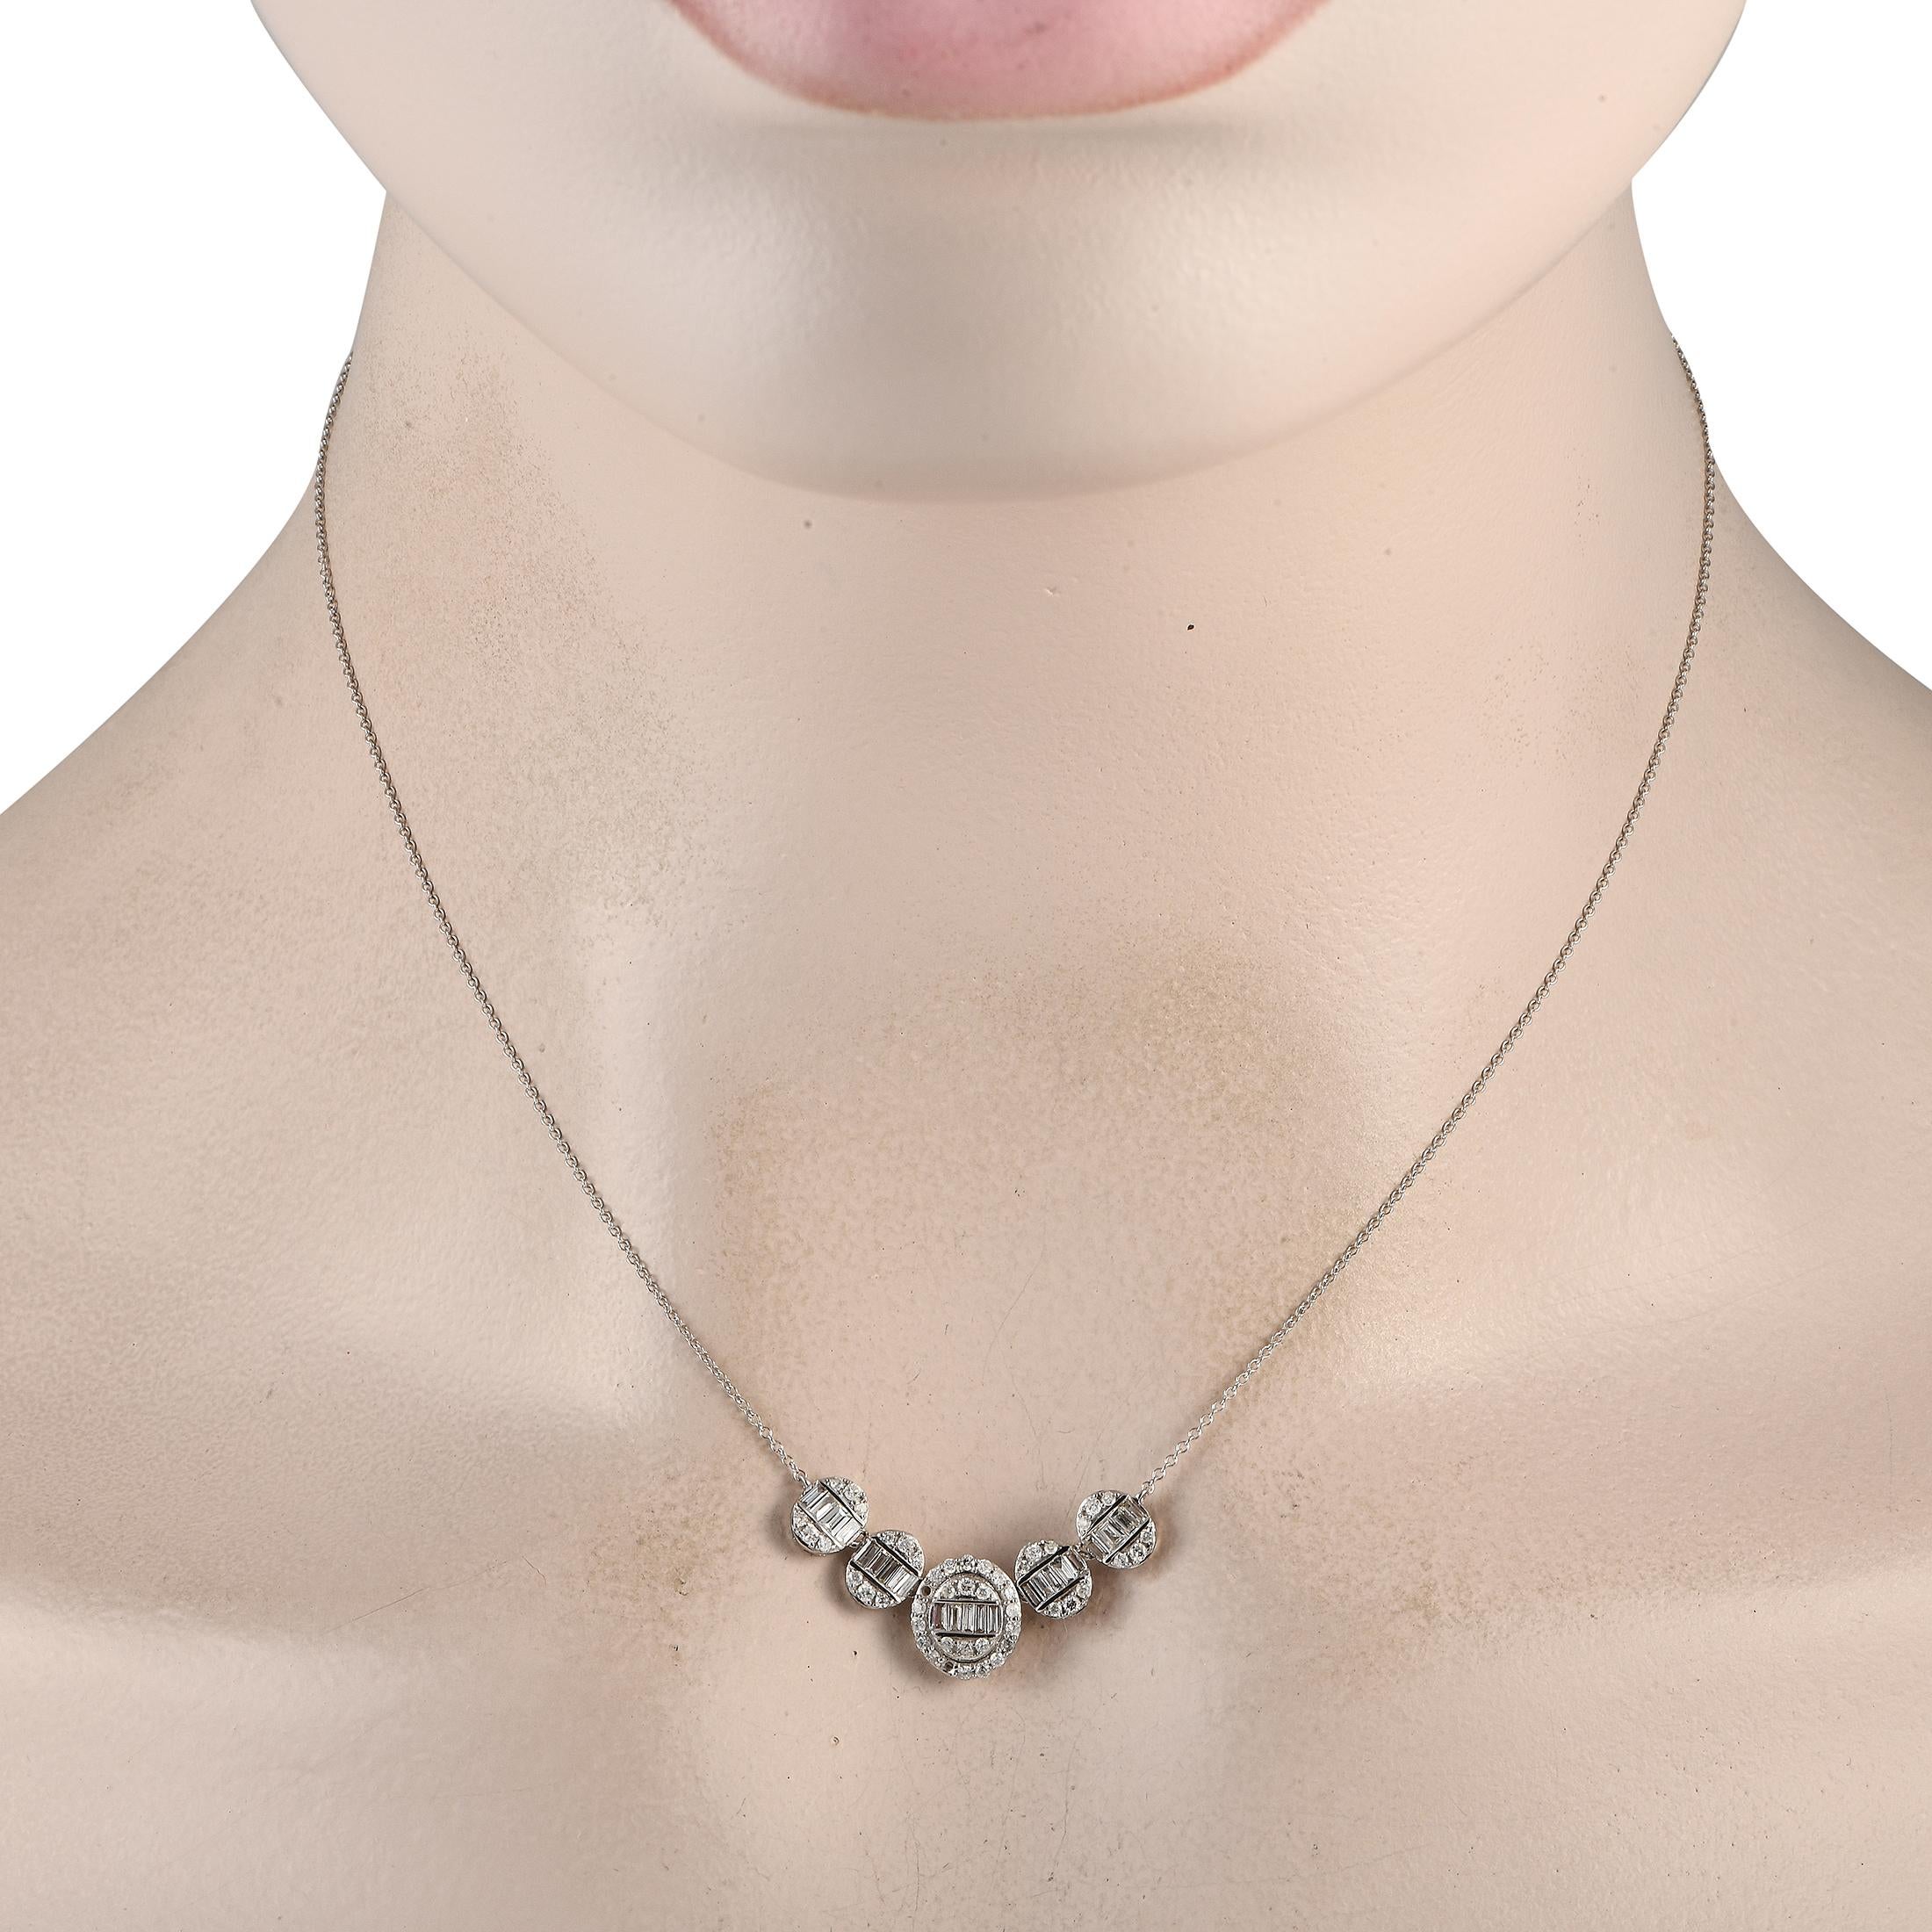 Add a dash of Art Deco inspired glamour to any ensemble with this impeccably crafted necklace. Diamonds with a total weight of 0.60 carats sparkle and shine from their place on the dramatic 14K White Gold pendant. The pendant measures 0.45 long by